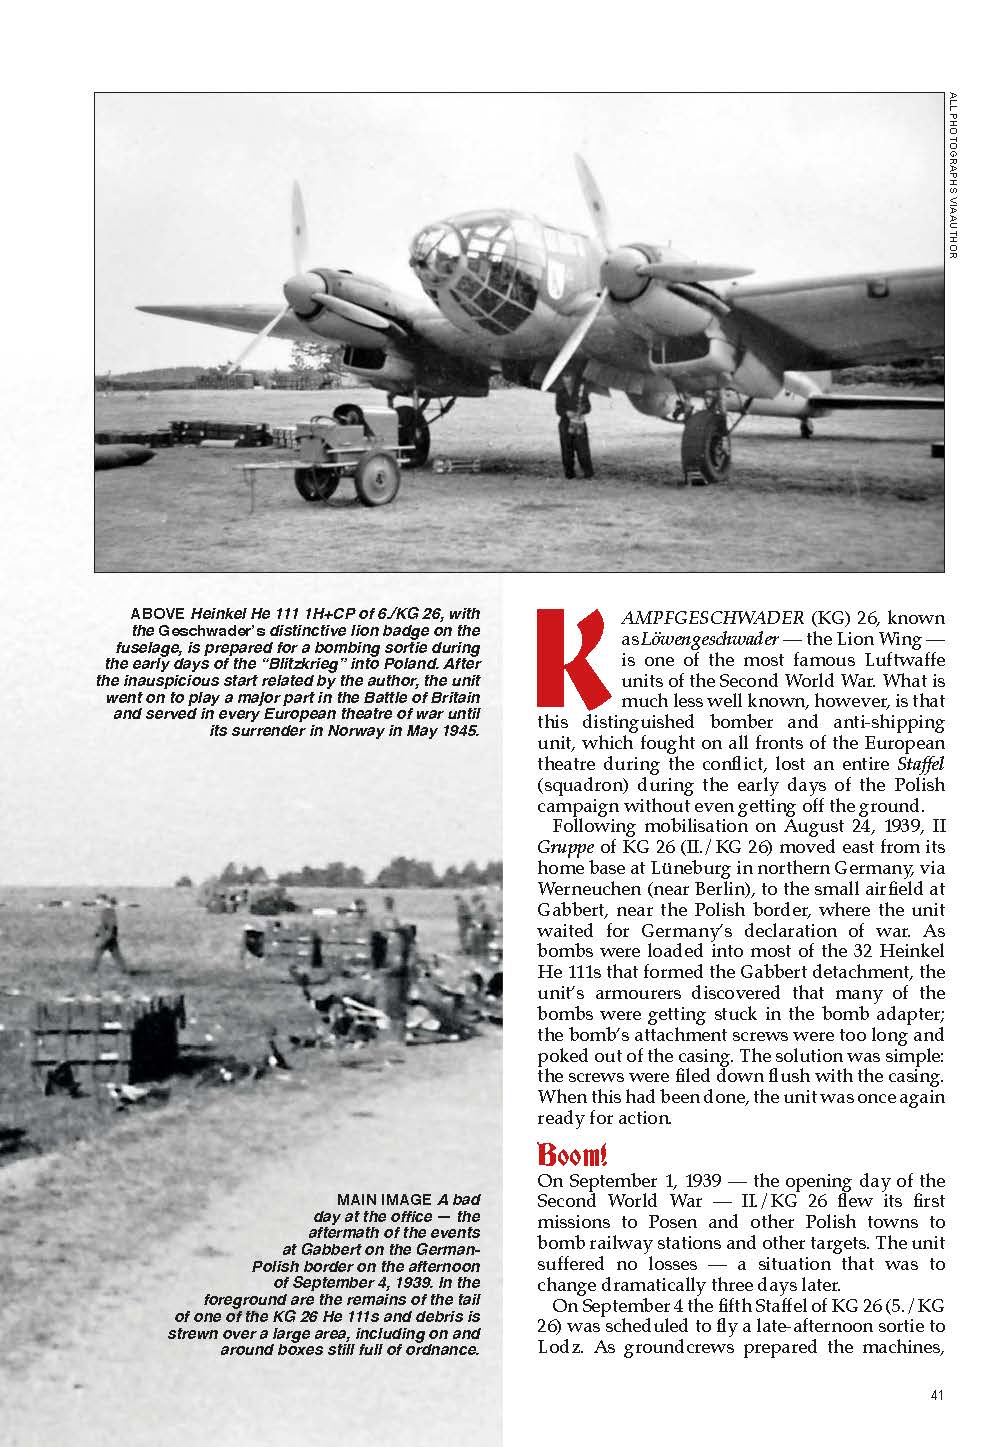 Lowengeschwaders Big Bang 1st Sep 1939 The Aviation Historian 2014 08 Page 41